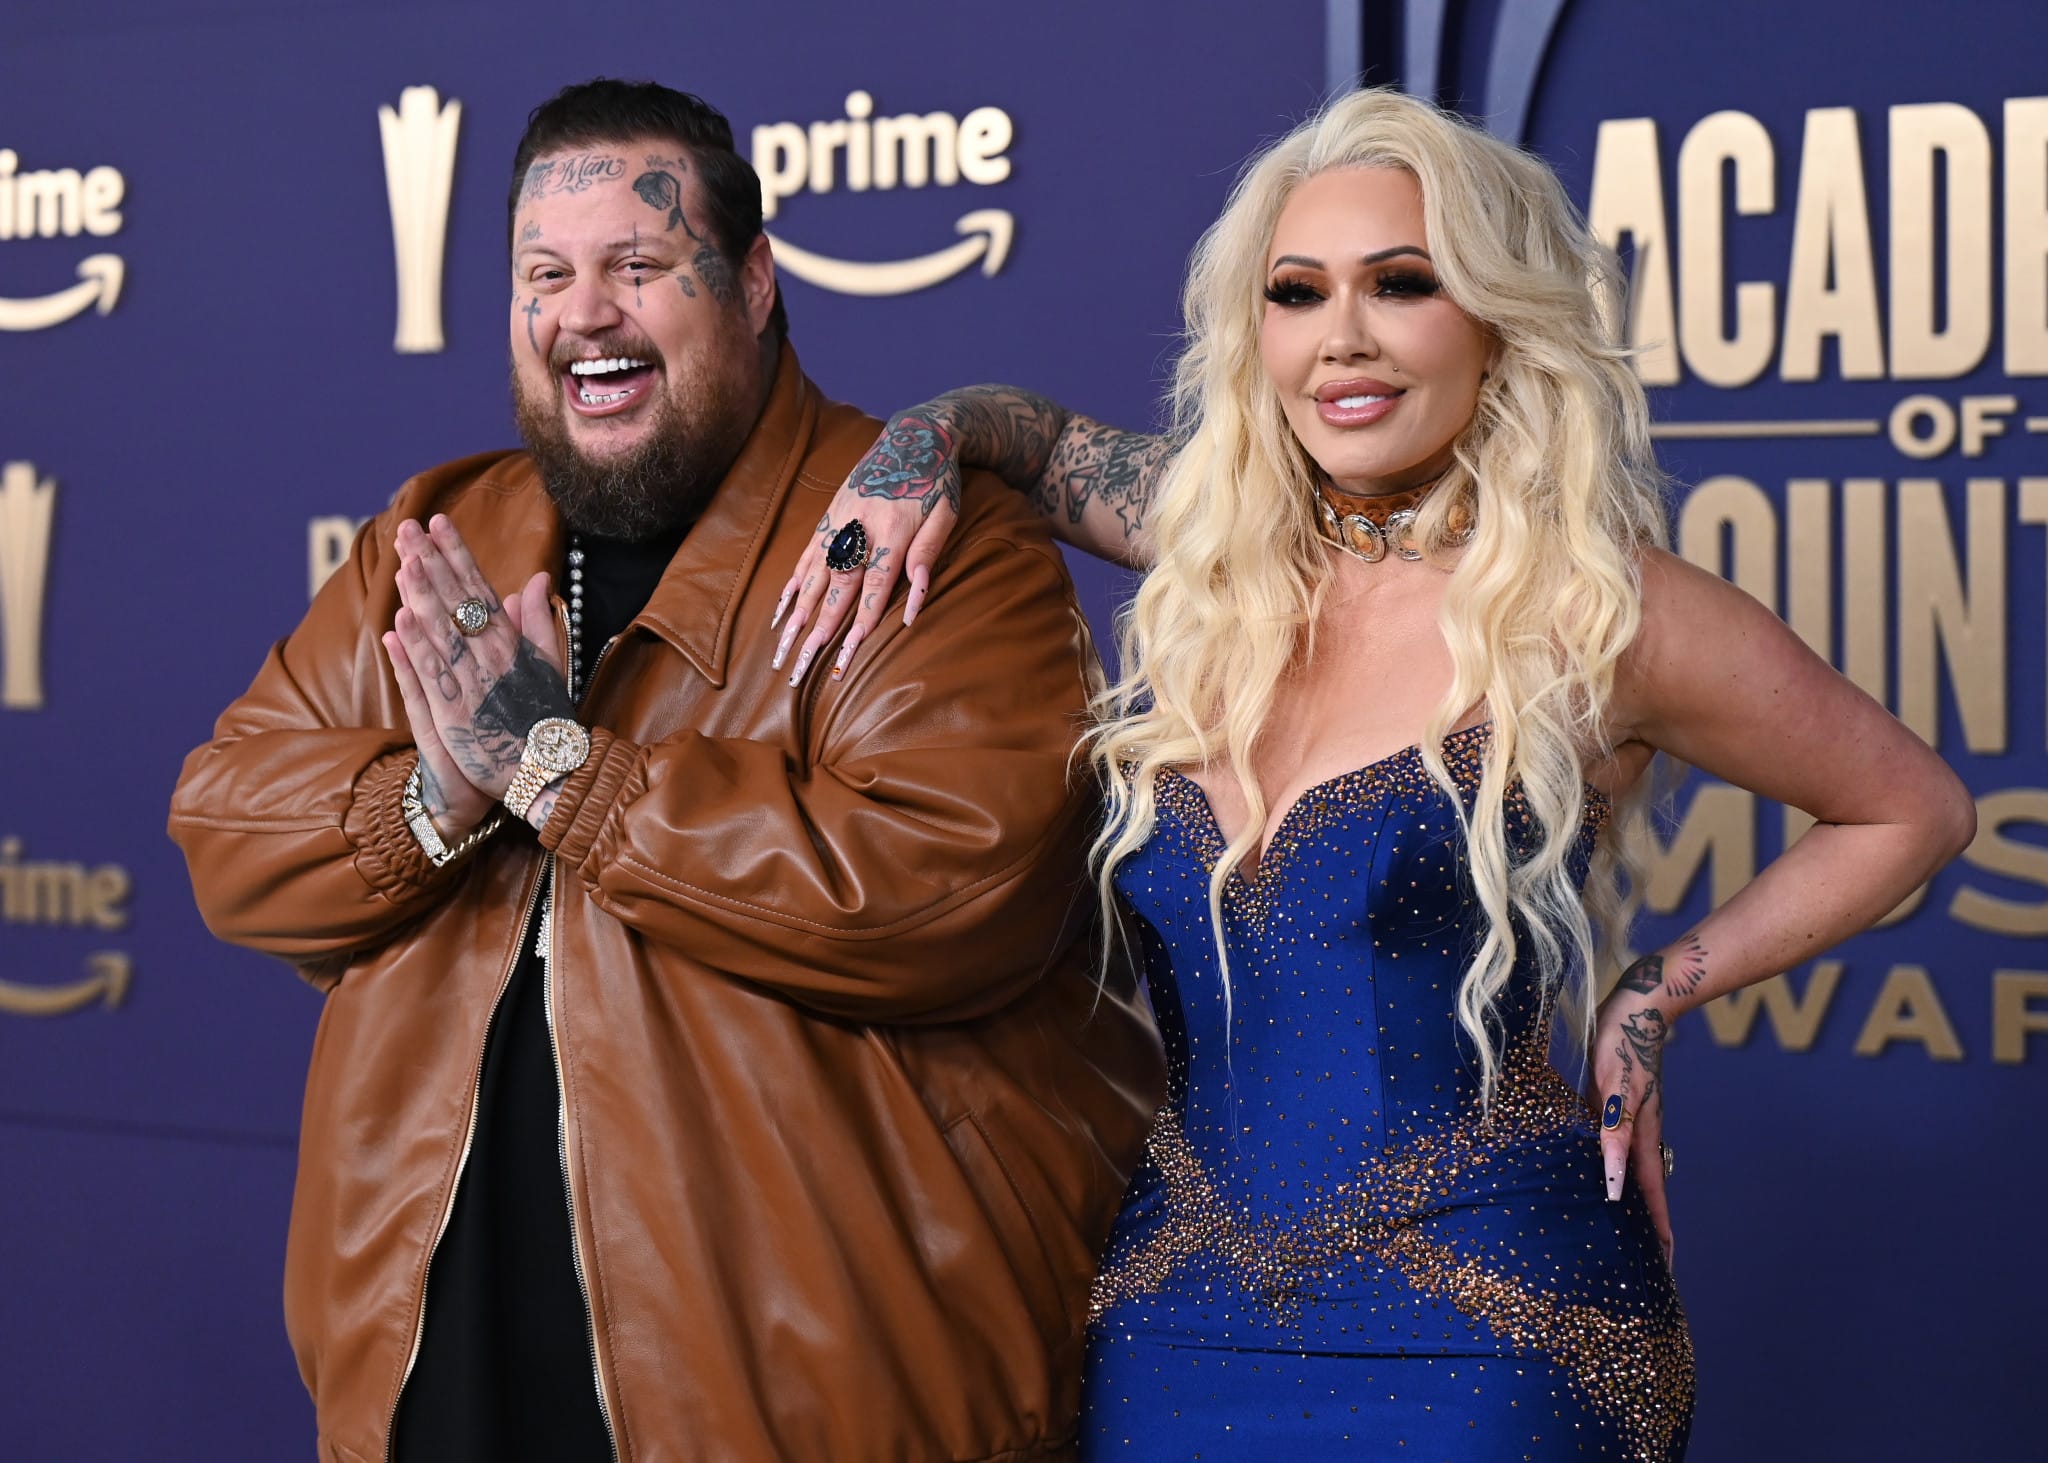 Jelly Roll & Bunnie Xo recently shared their plans to have a baby